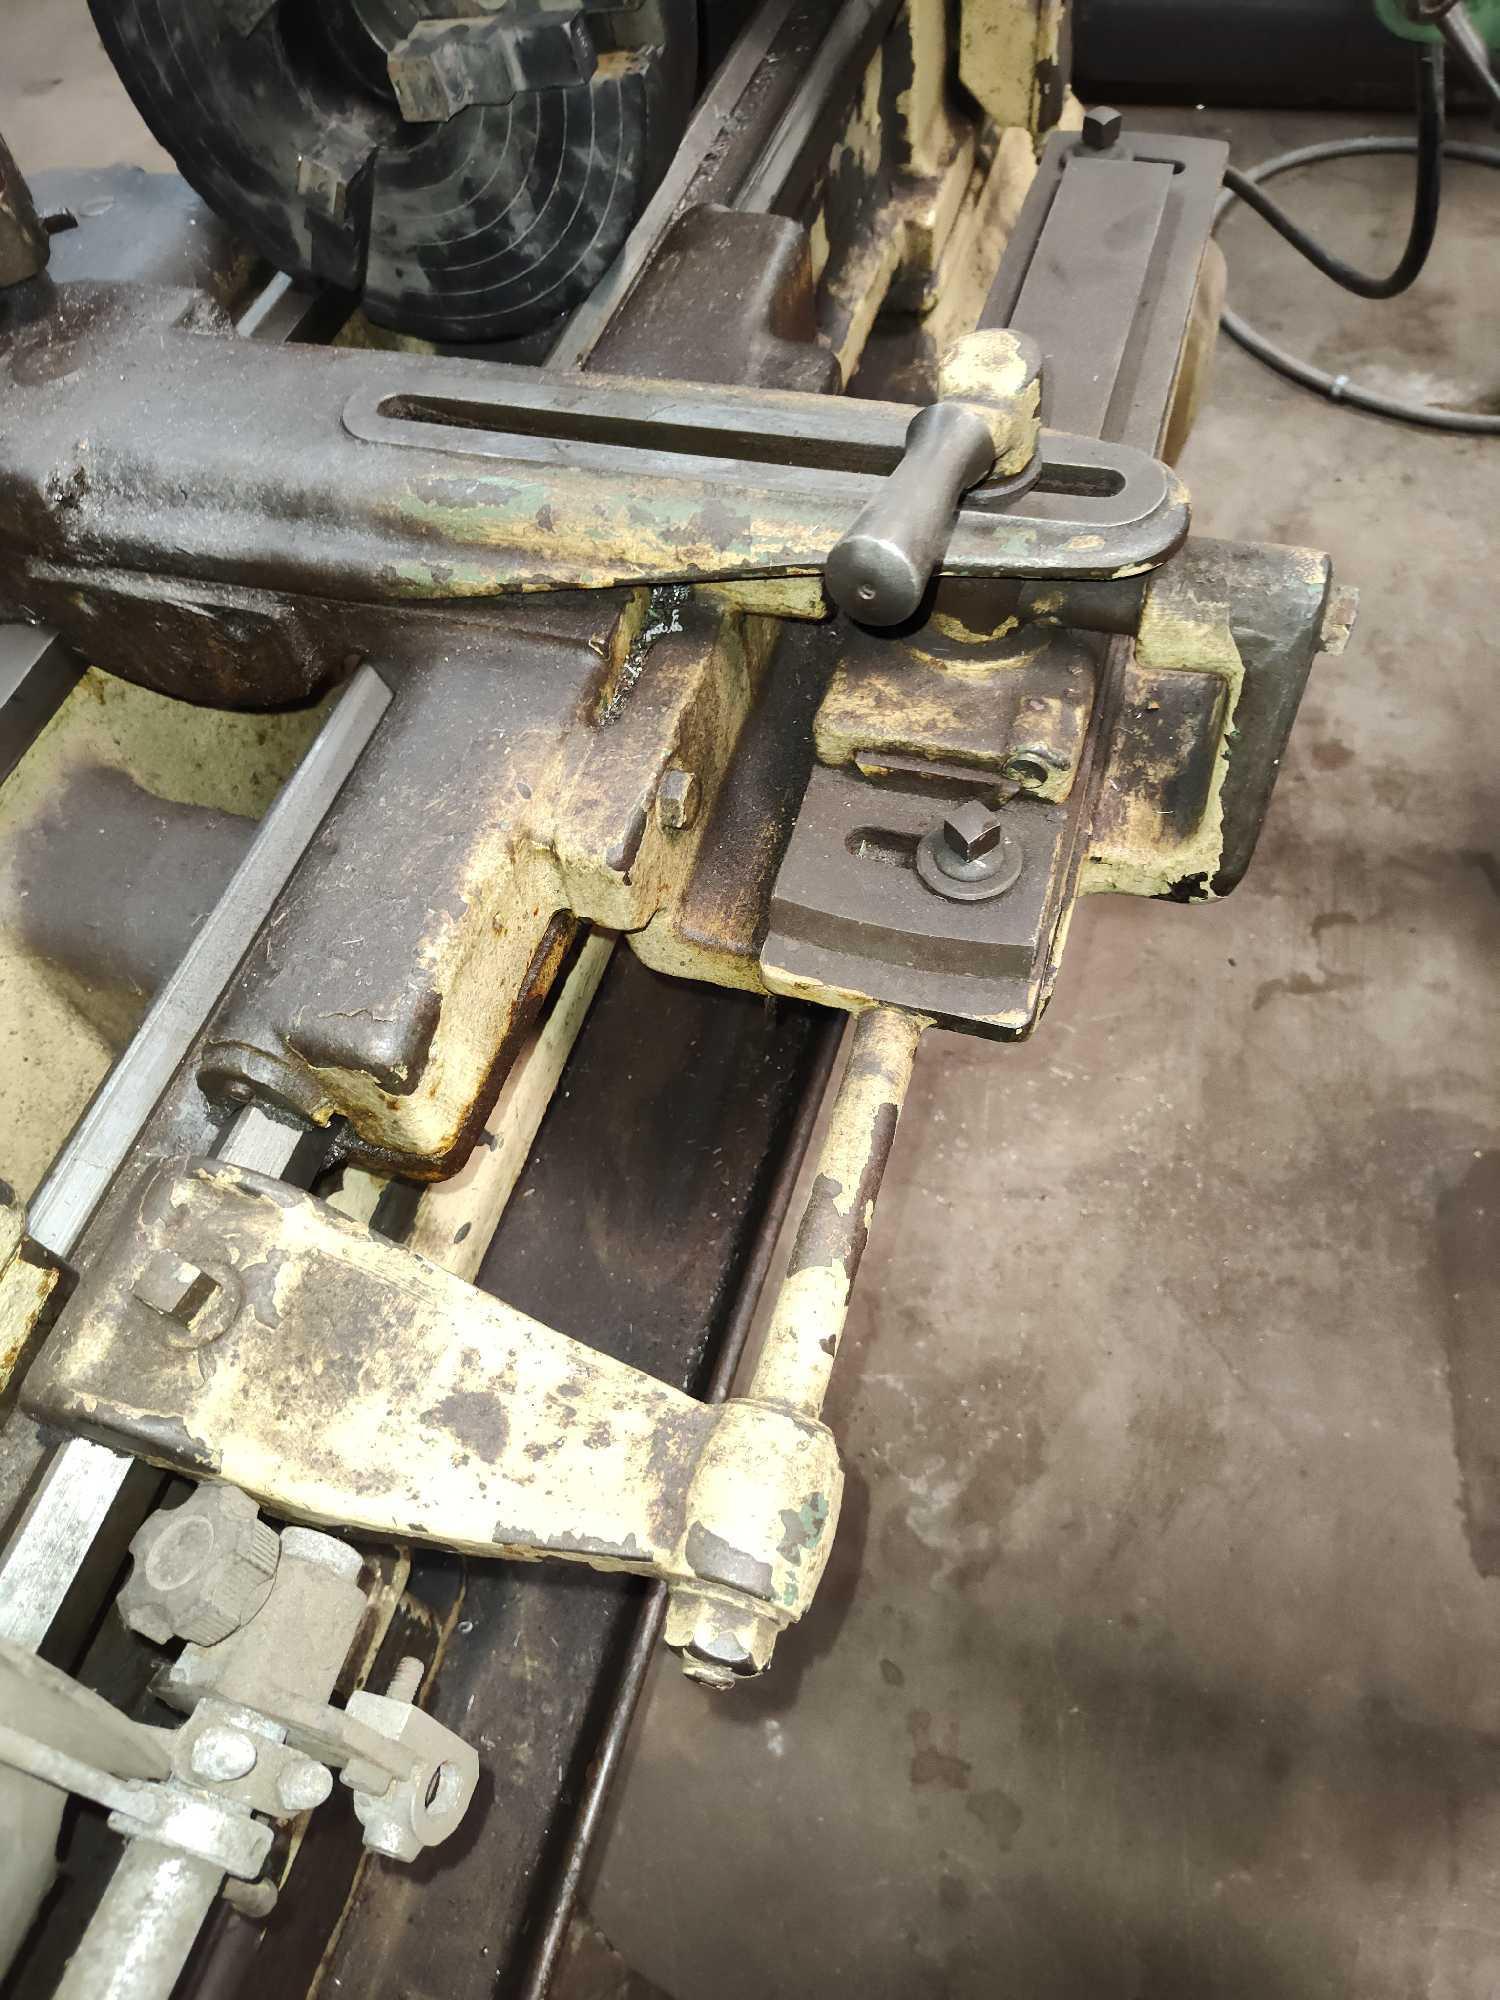 South Bend lathe, working condition.